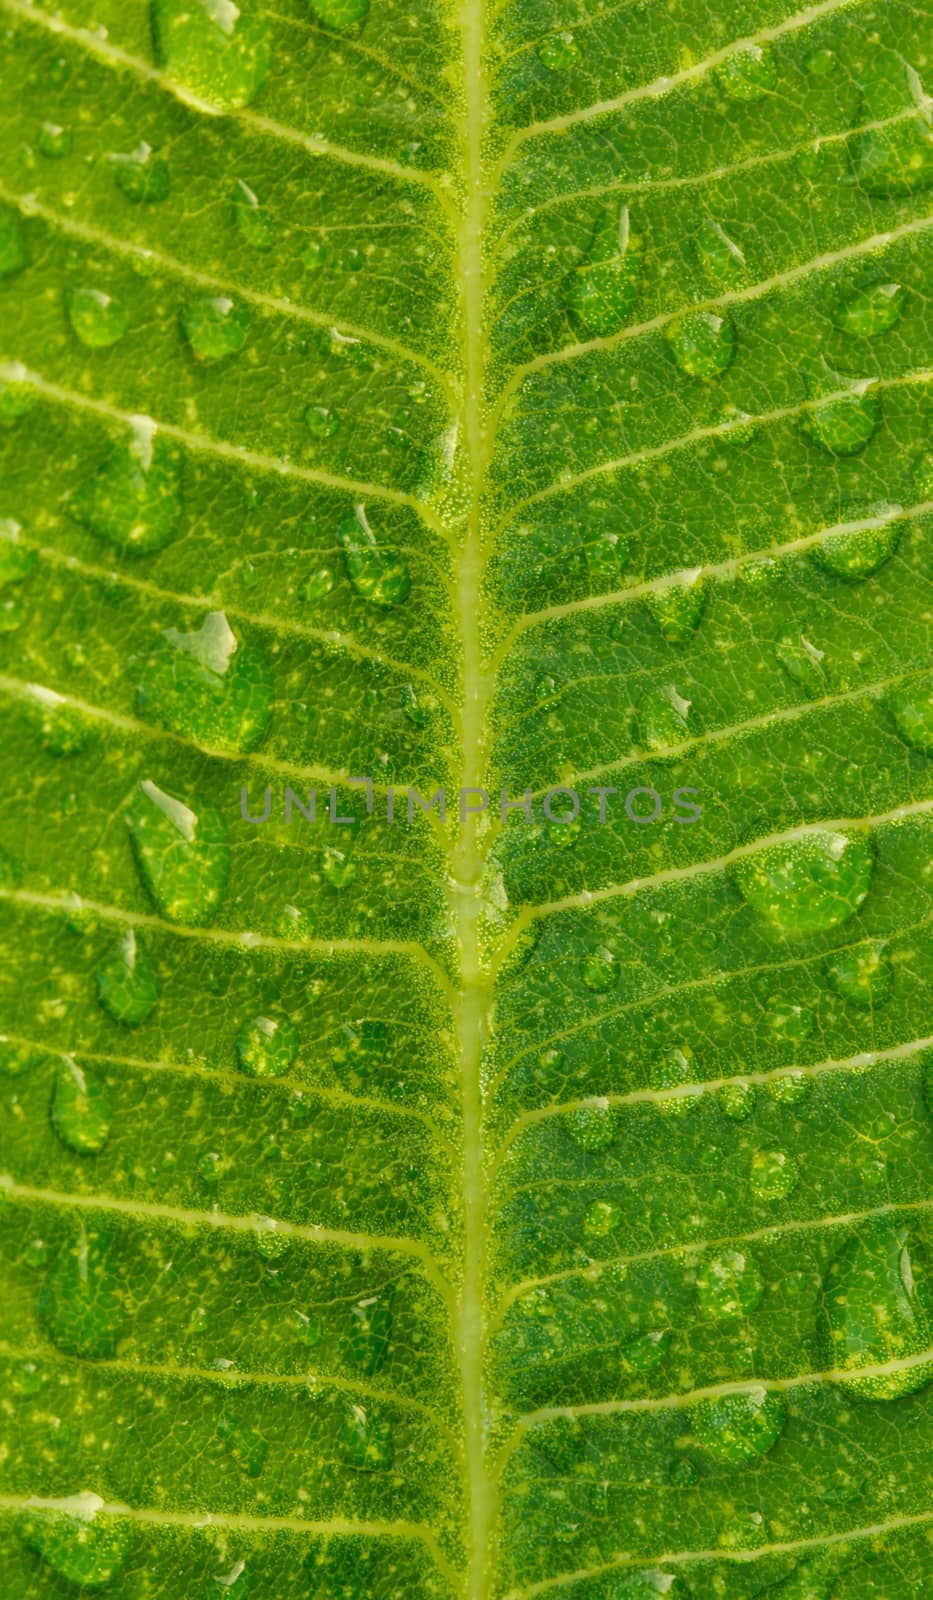 Green leaf with water drops for background